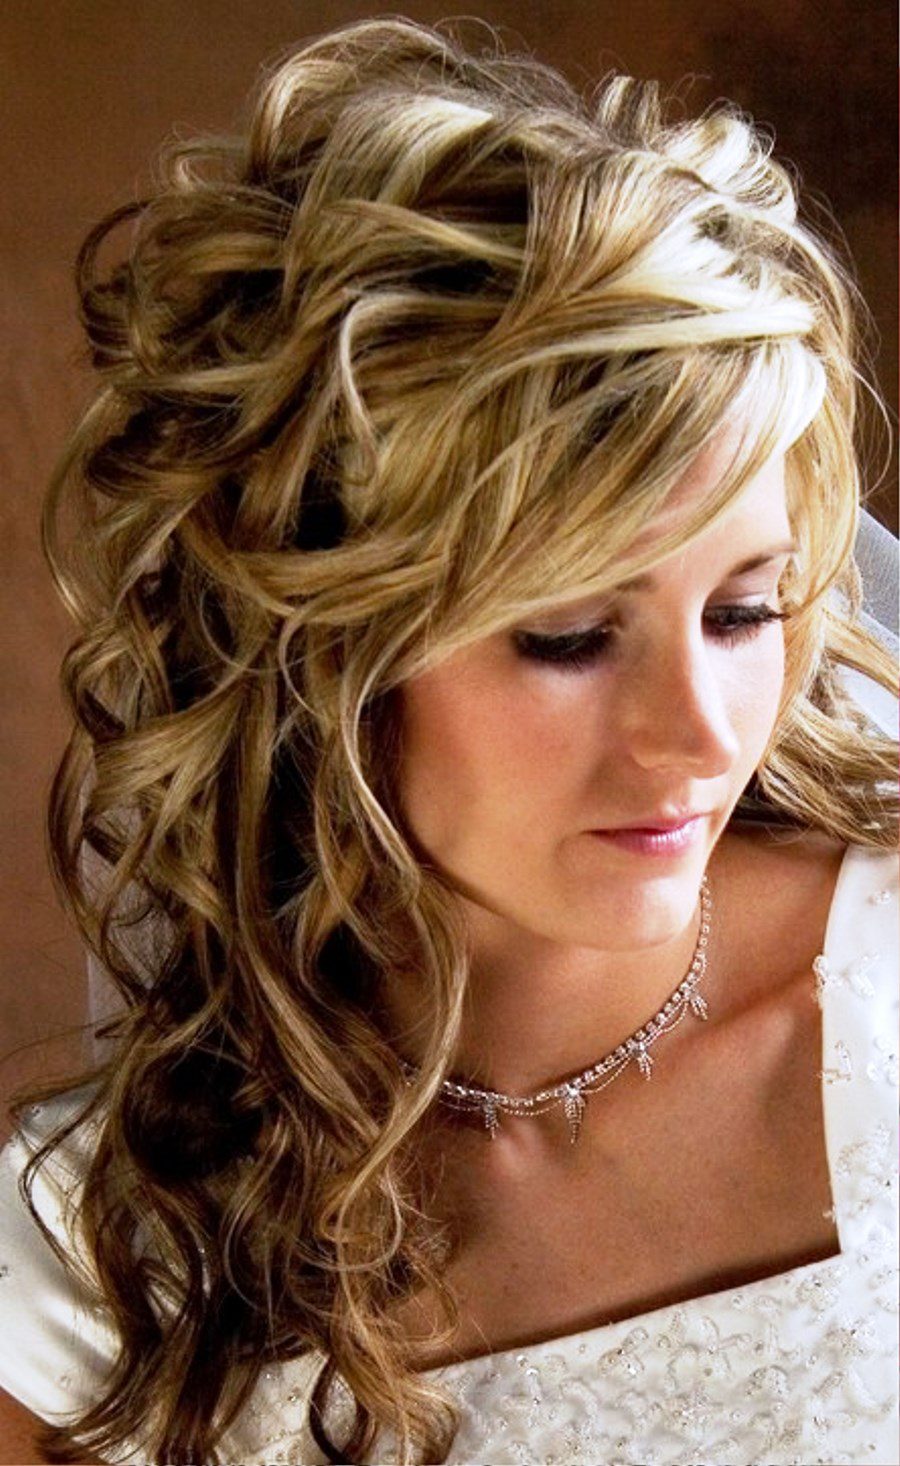 Long Wavy Curly Hairstyle For Wedding